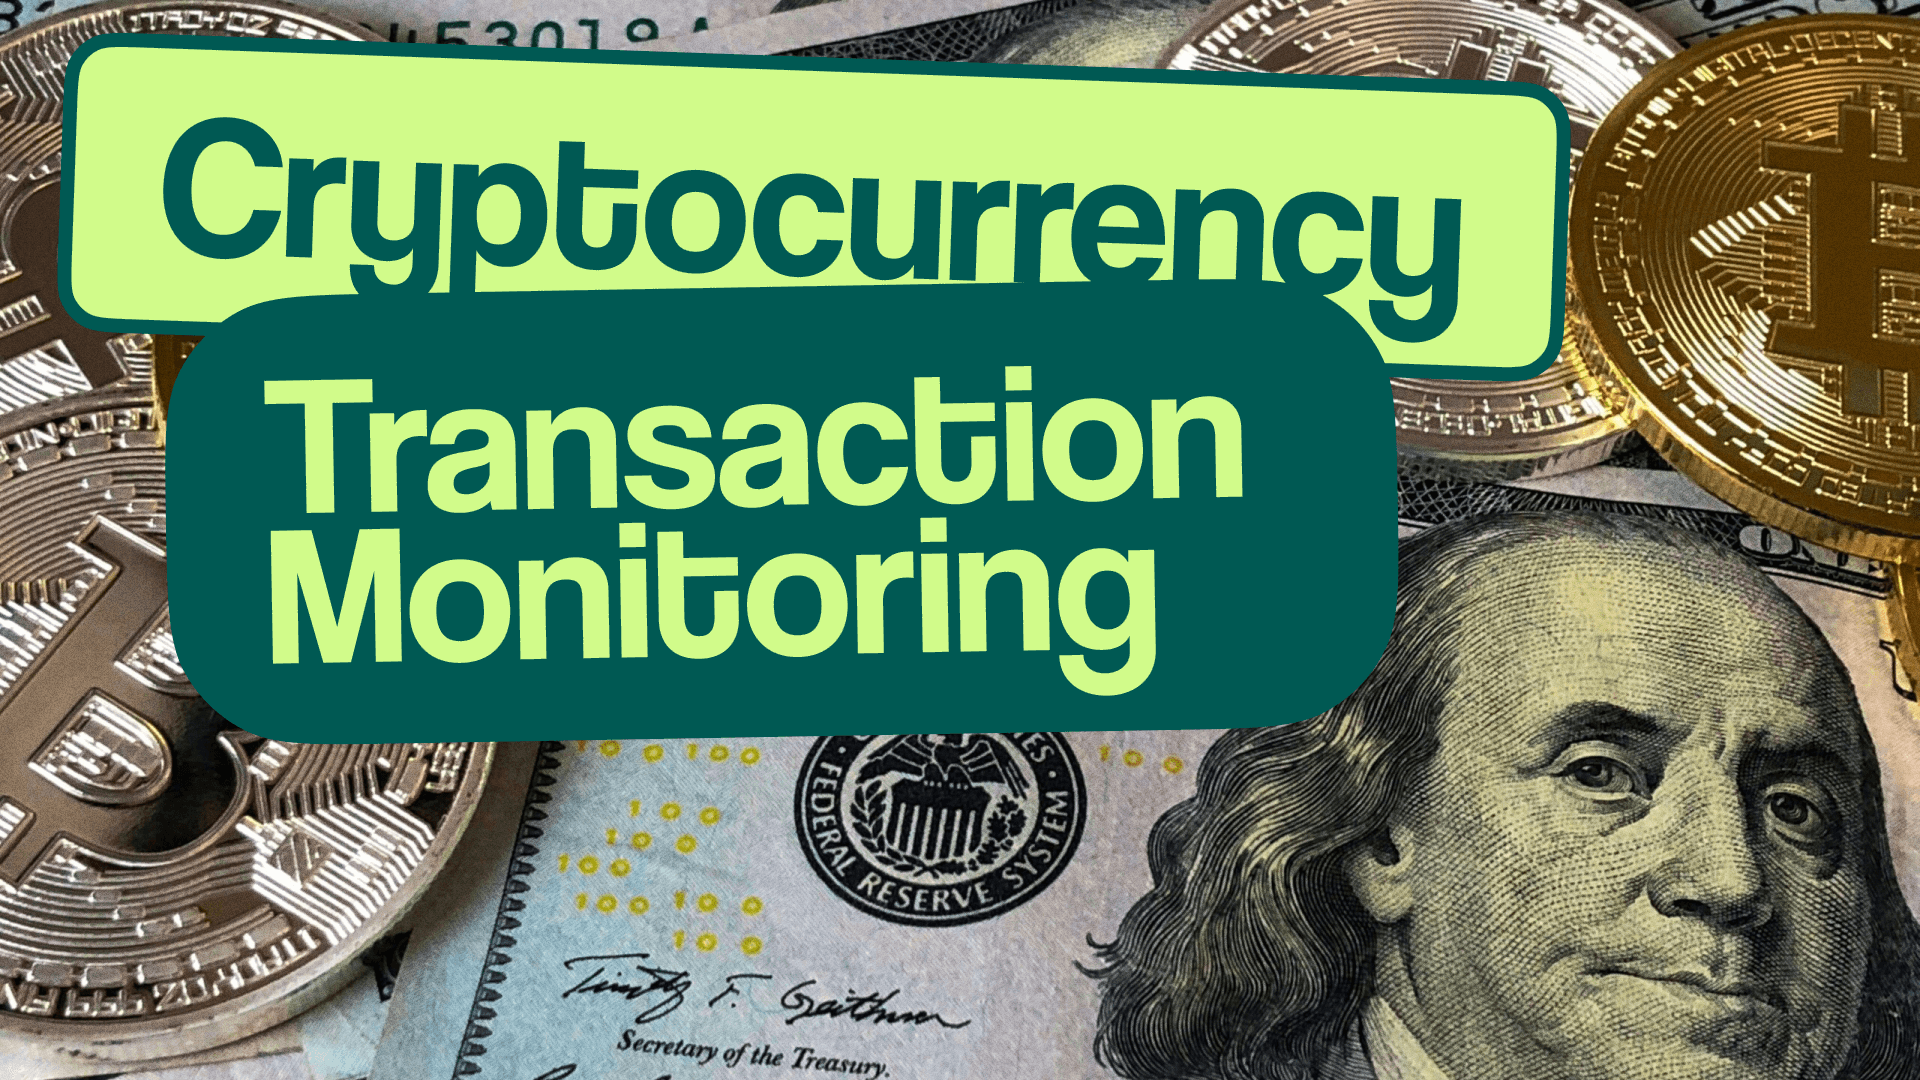 Cryptocurrency Transaction Monitoring: how it works